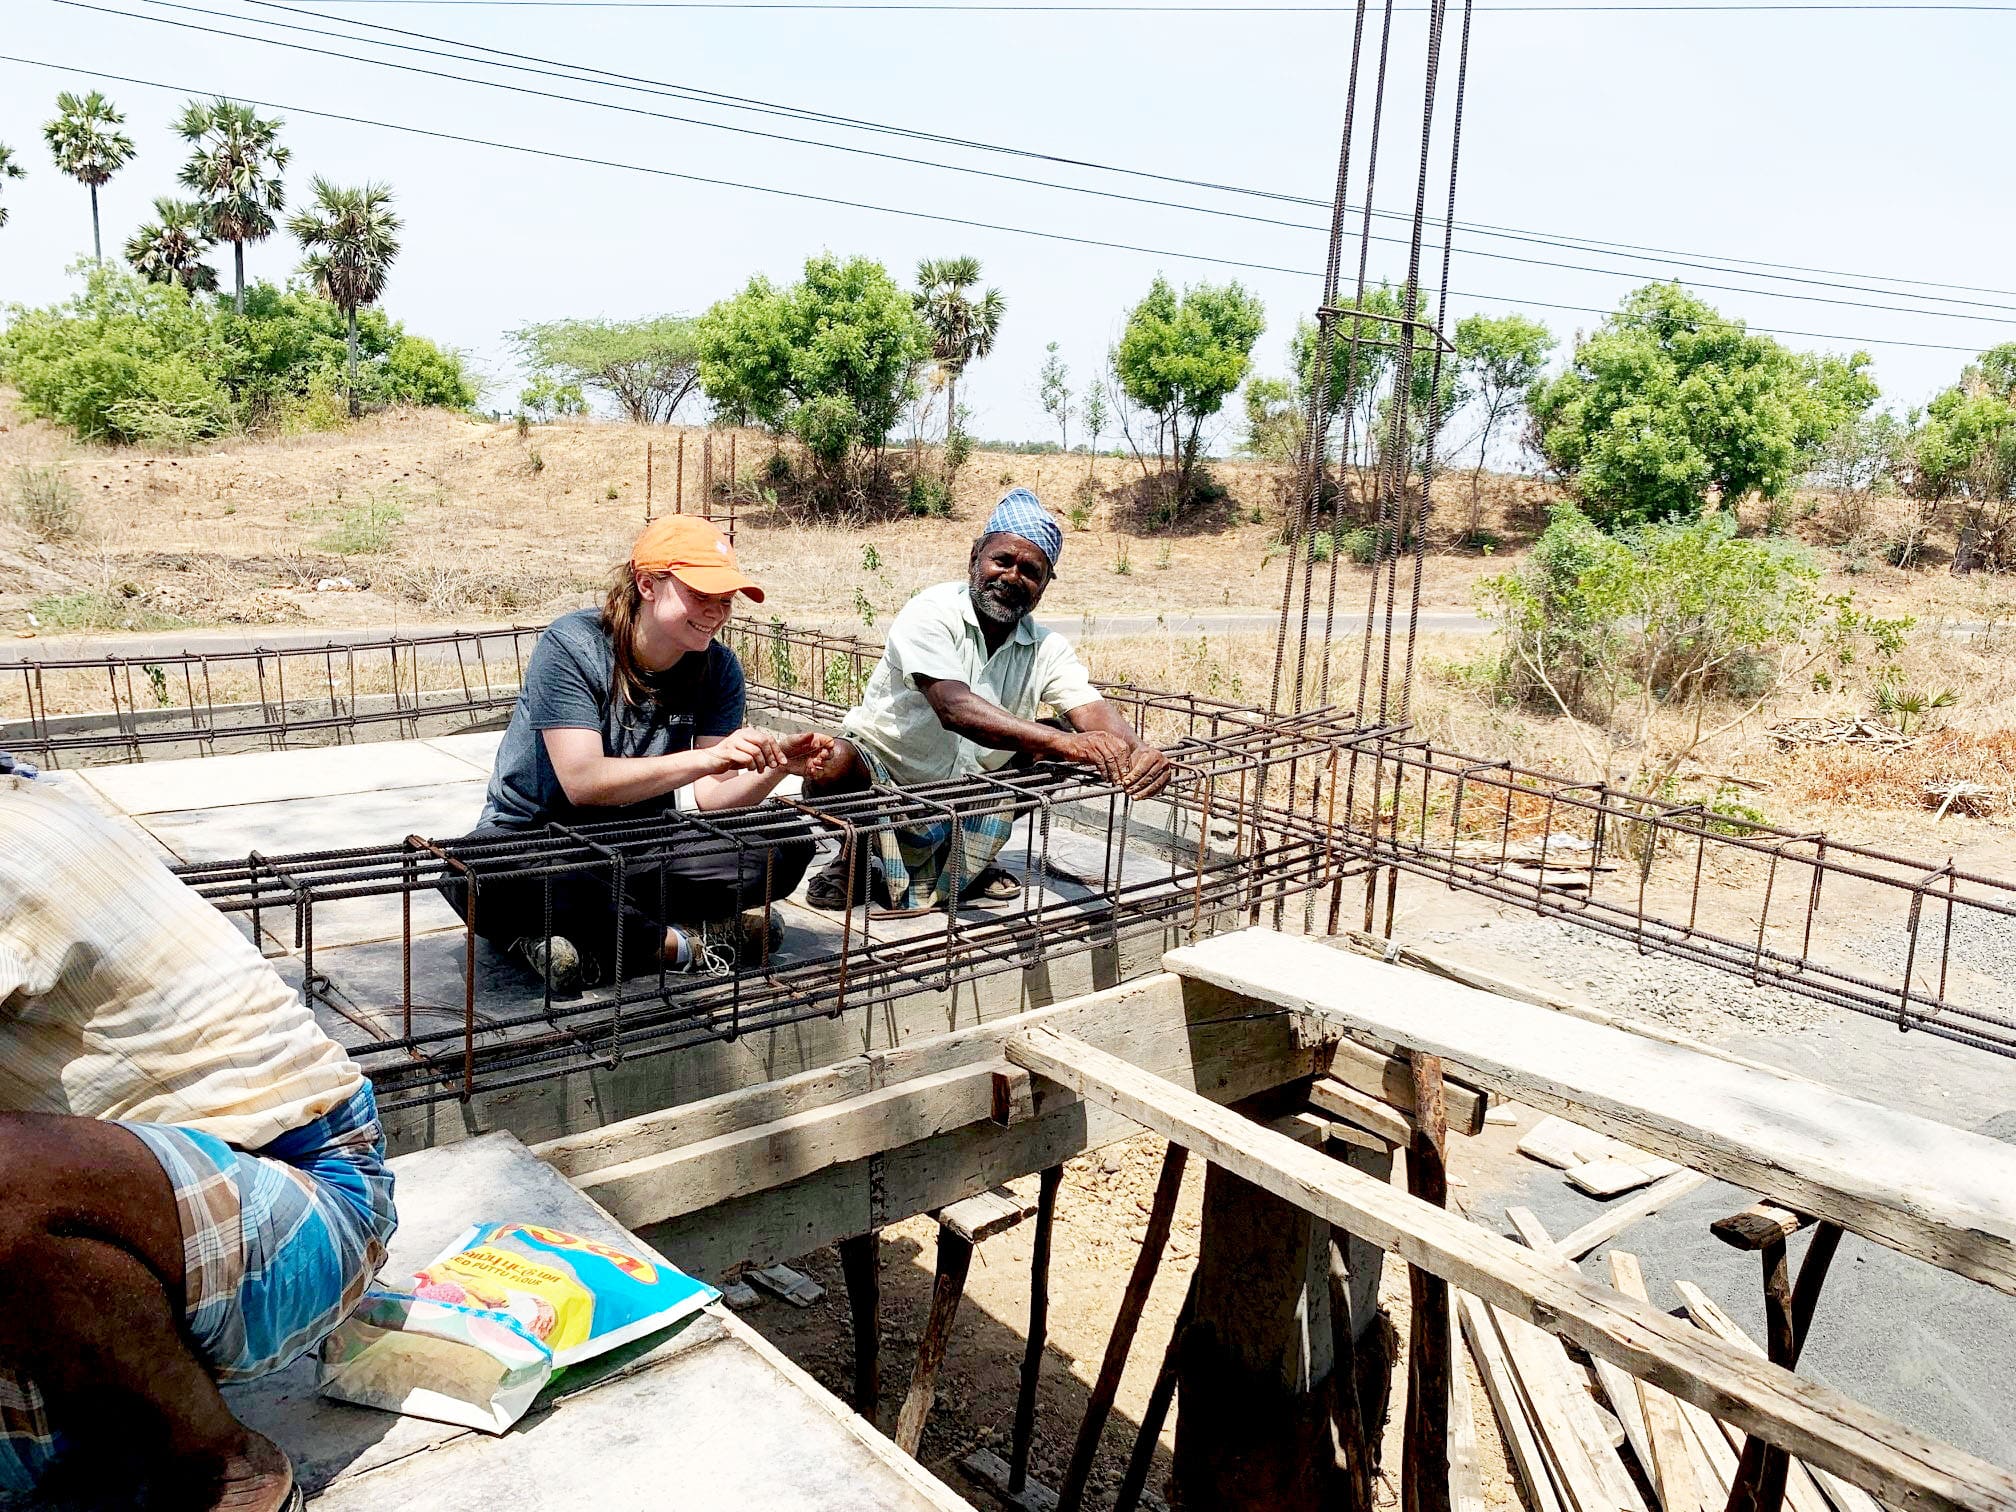 Civil engineering and Plan II senior Zia Lyle and team in India to build disaster relief shelter.